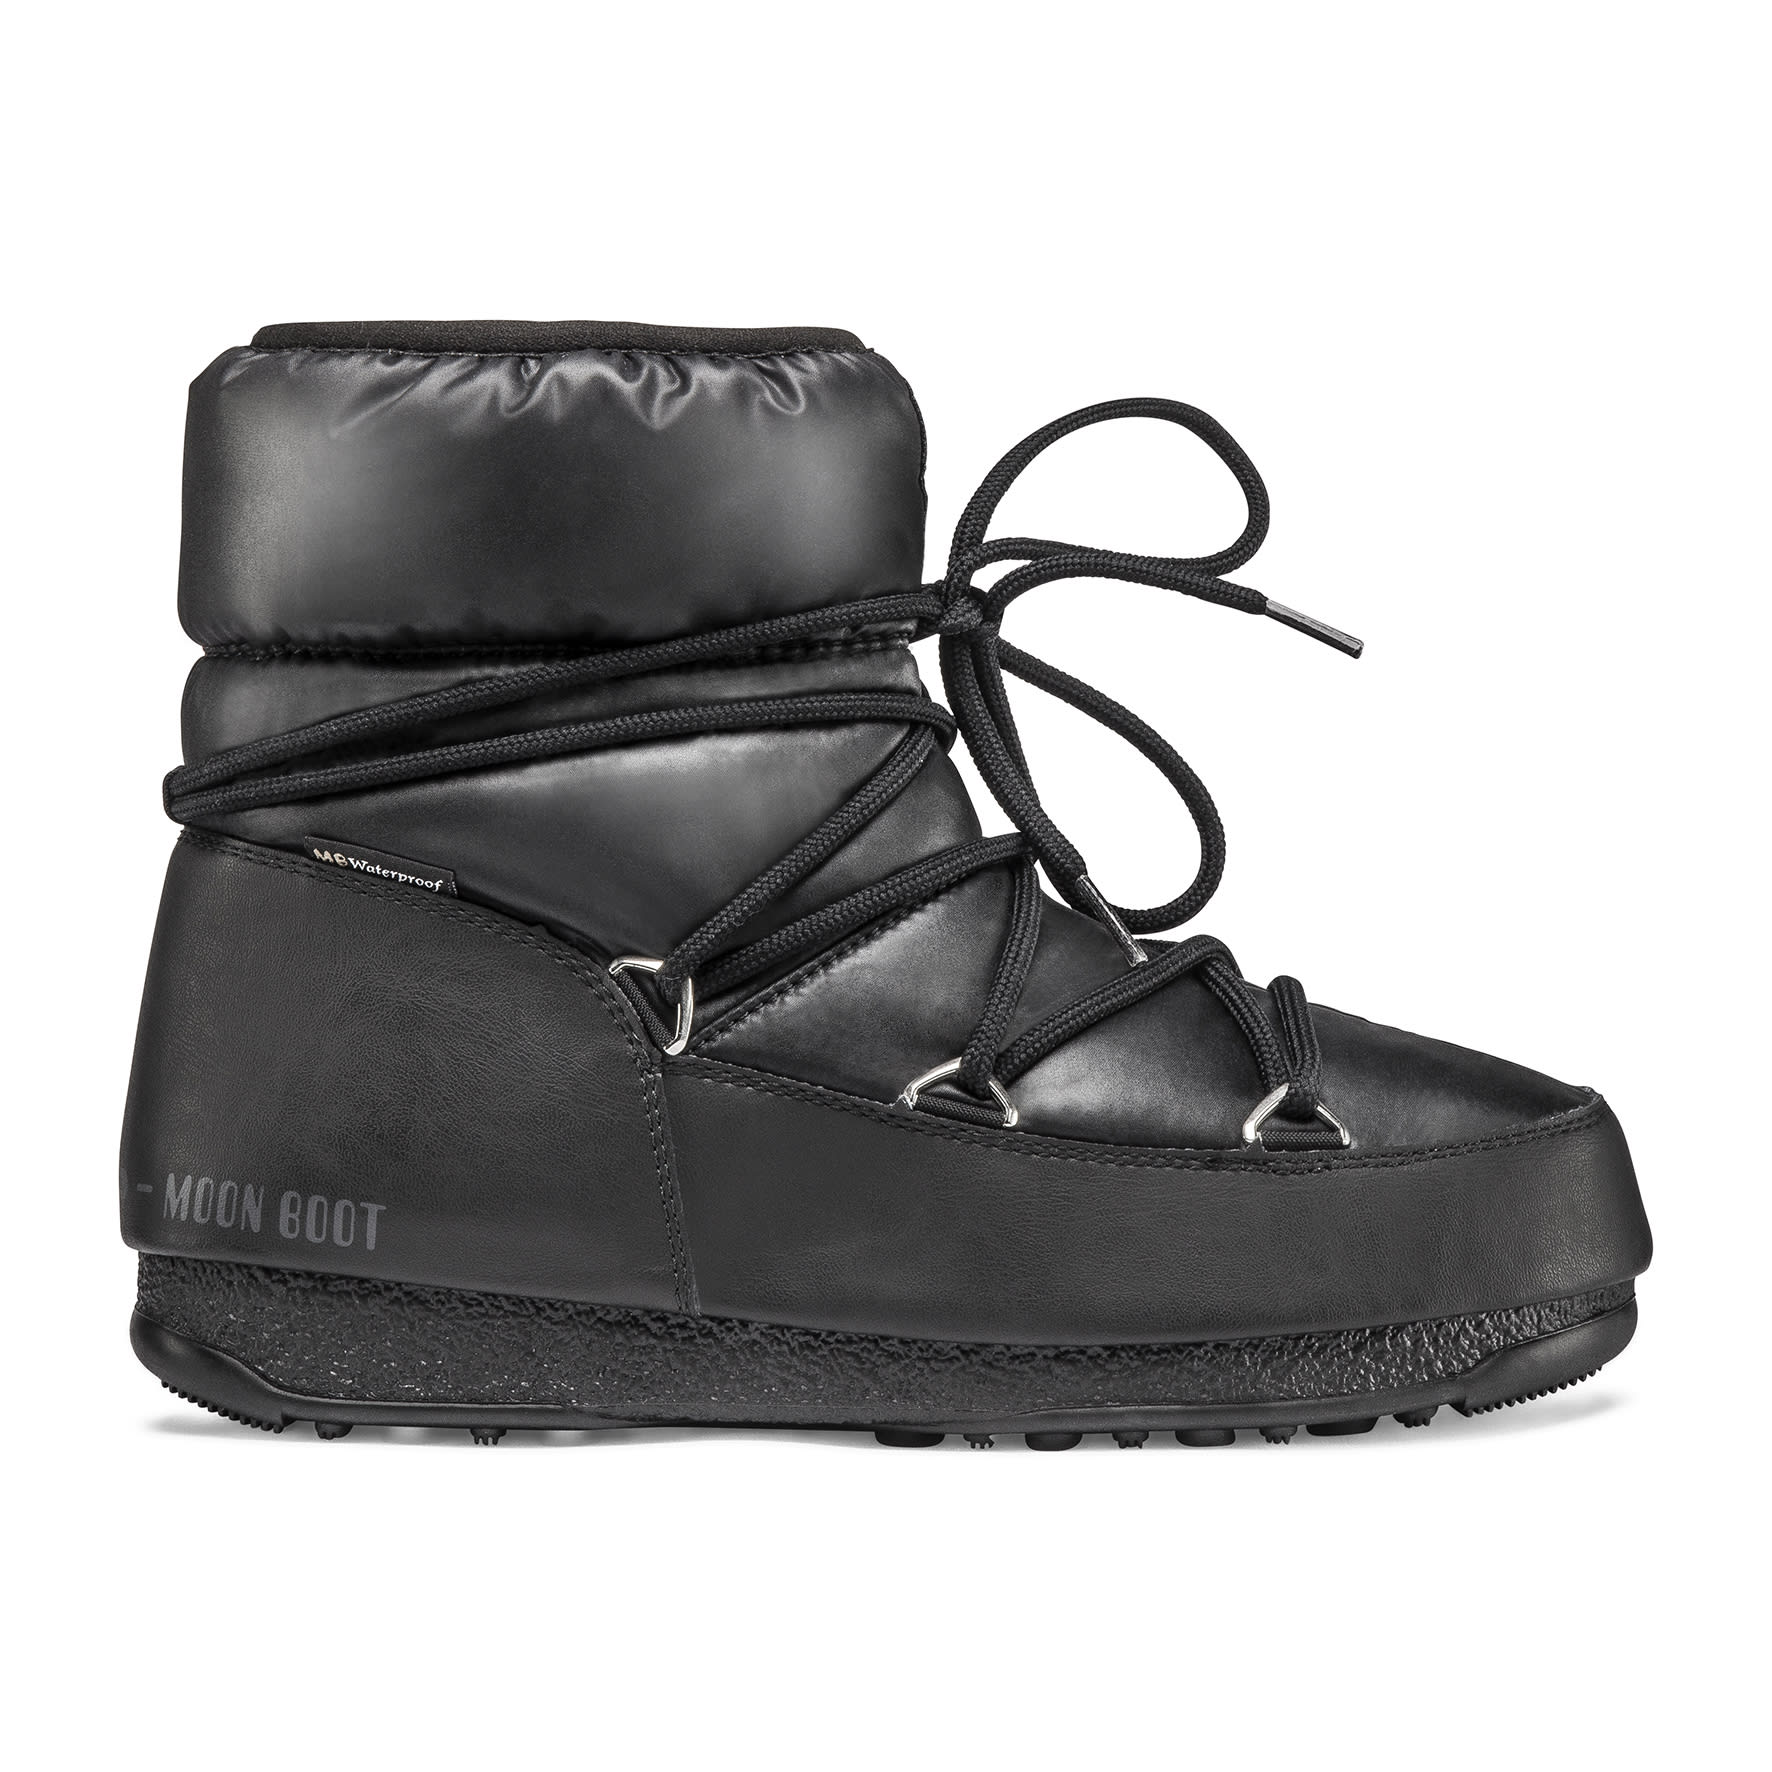 Buy Moon Boot Women's Protecht Low Boots from Outnorth